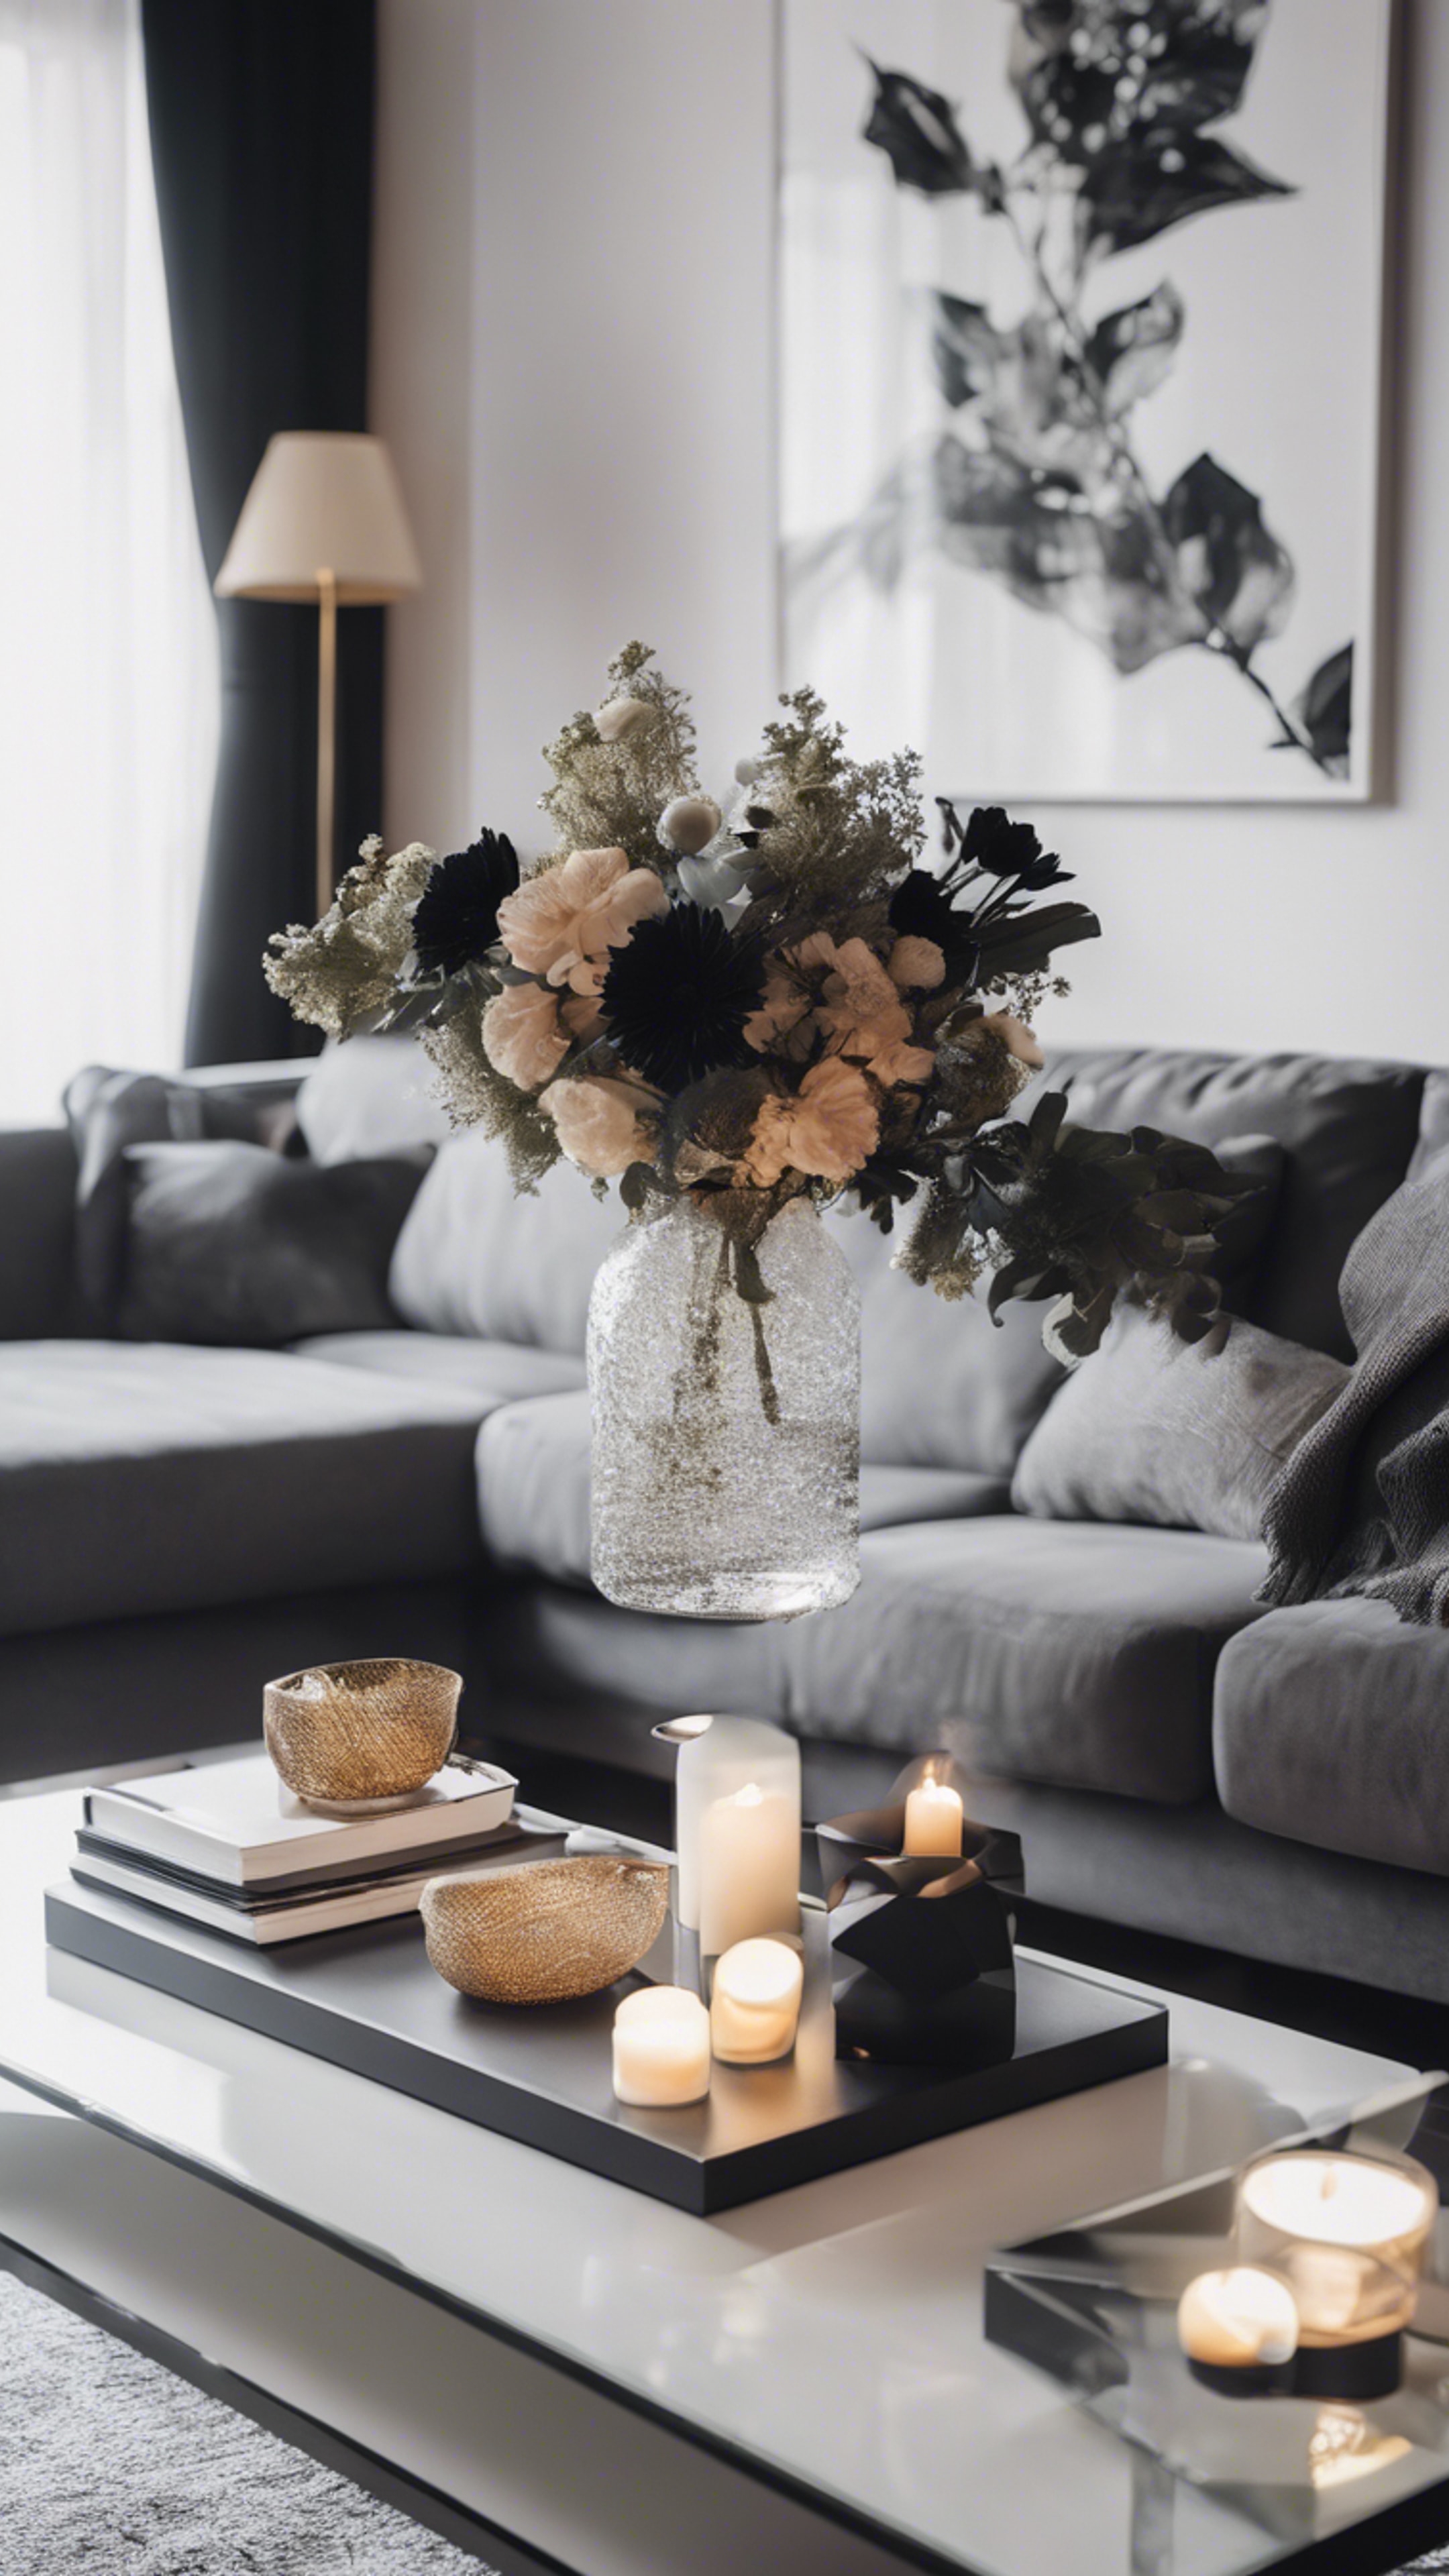 A brightly lit modern living room featuring a center table decorated with a black floral arrangement.壁紙[4fa54151a5604274b107]